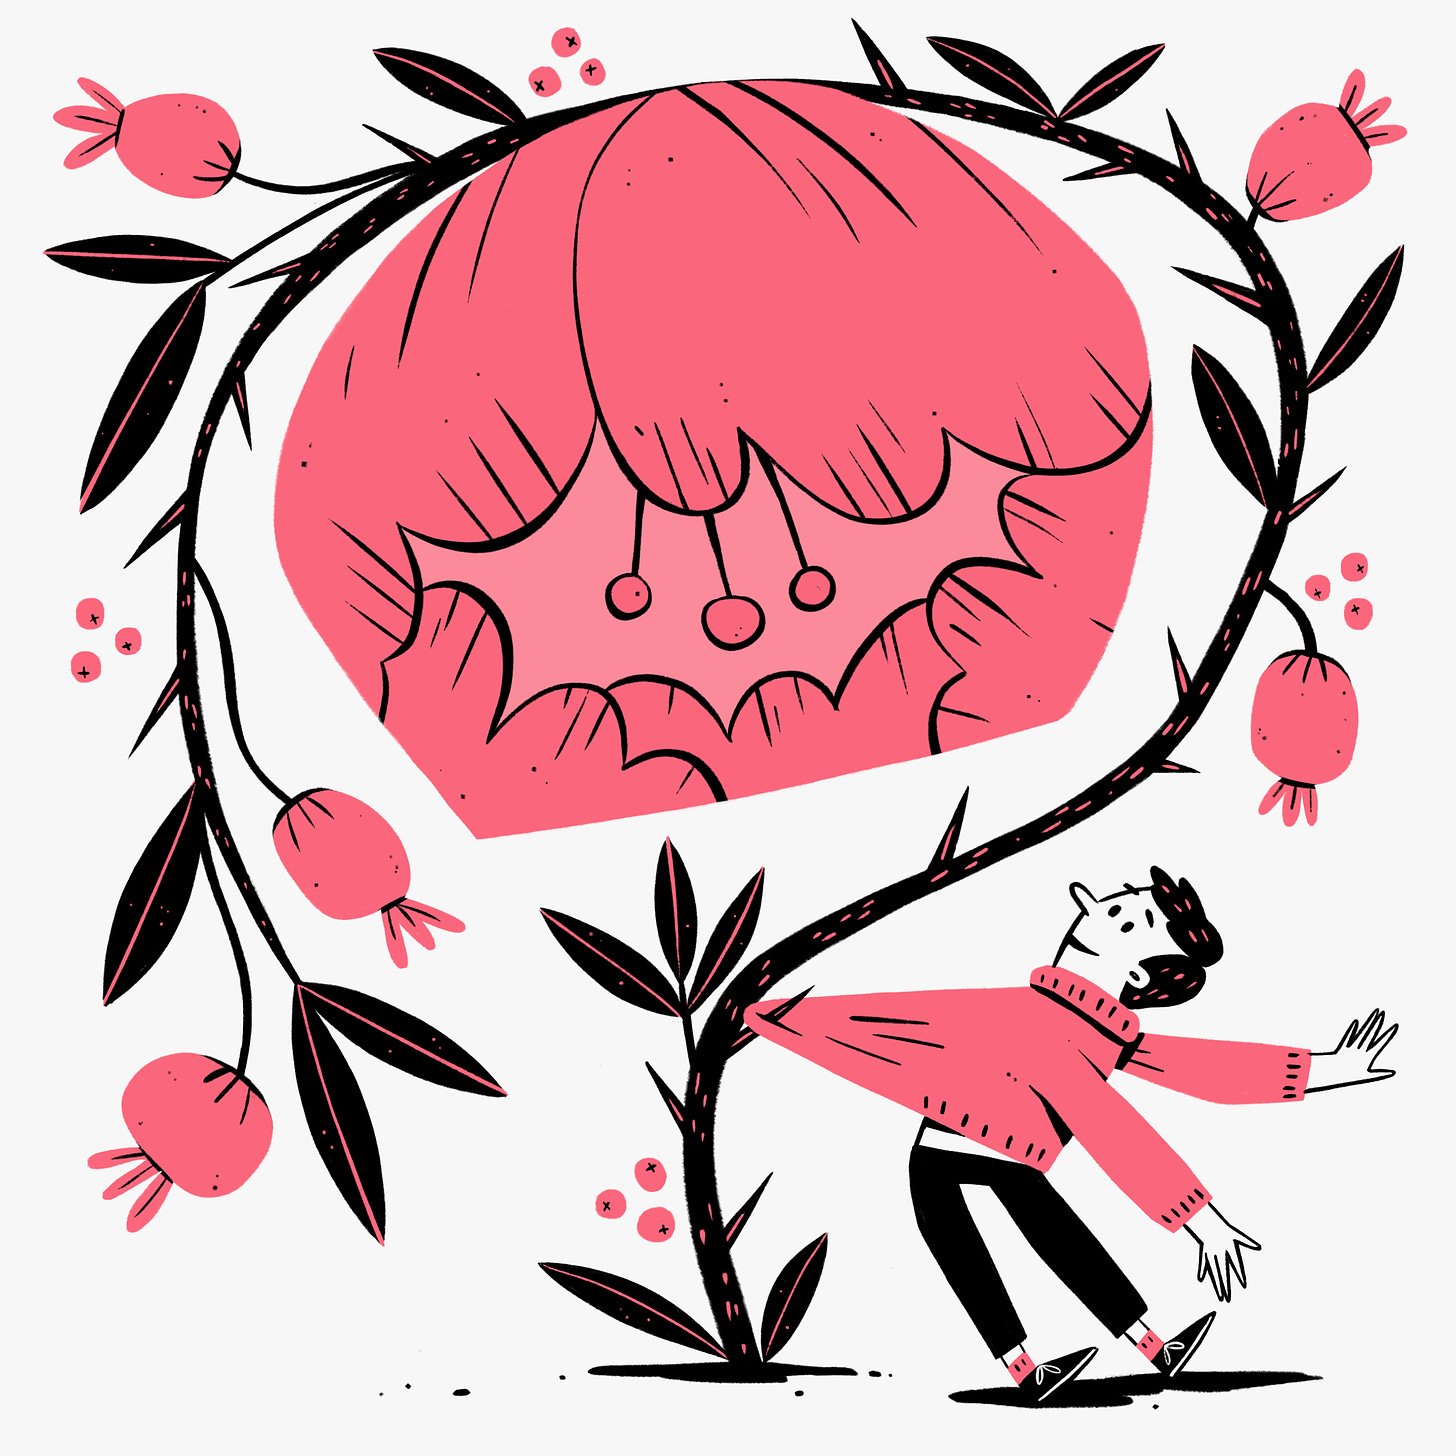 An illustration of a man who has caught his jumper on a large beautiful flower.